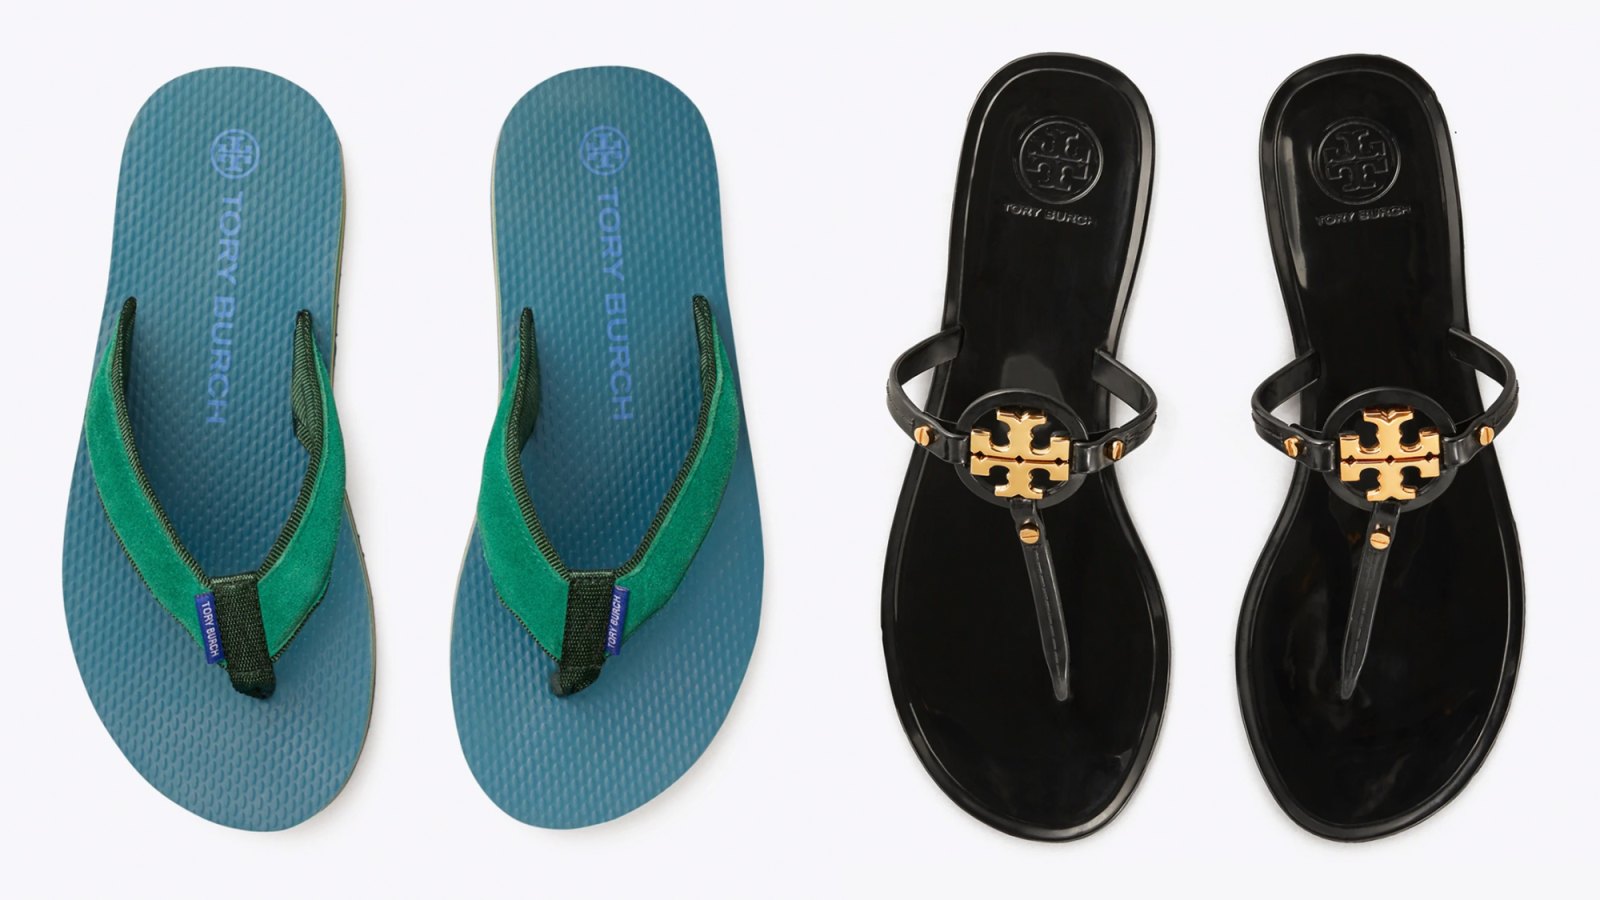 Favorite Summer Sandals from Tory Burch - The Beauty Look Book